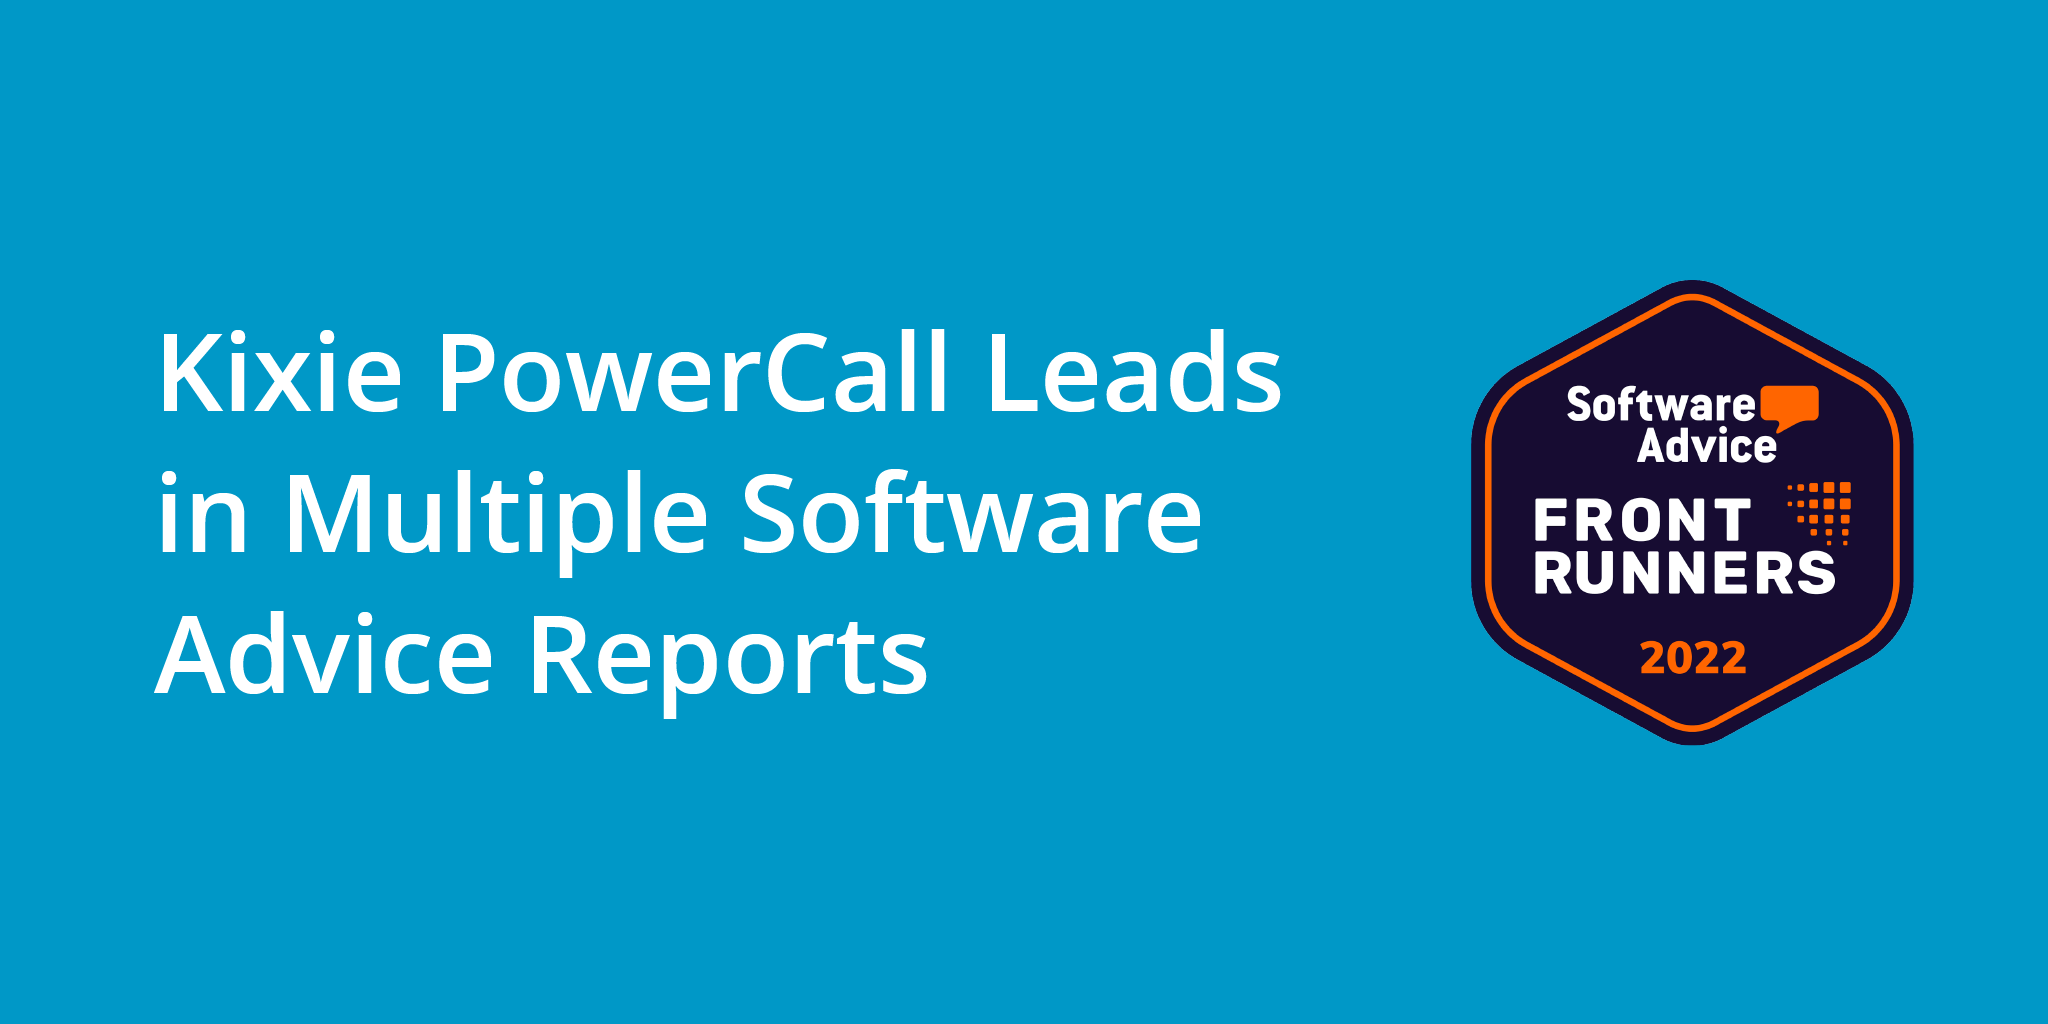 Kixie PowerCall Leads in Multiple Software Advice Reports